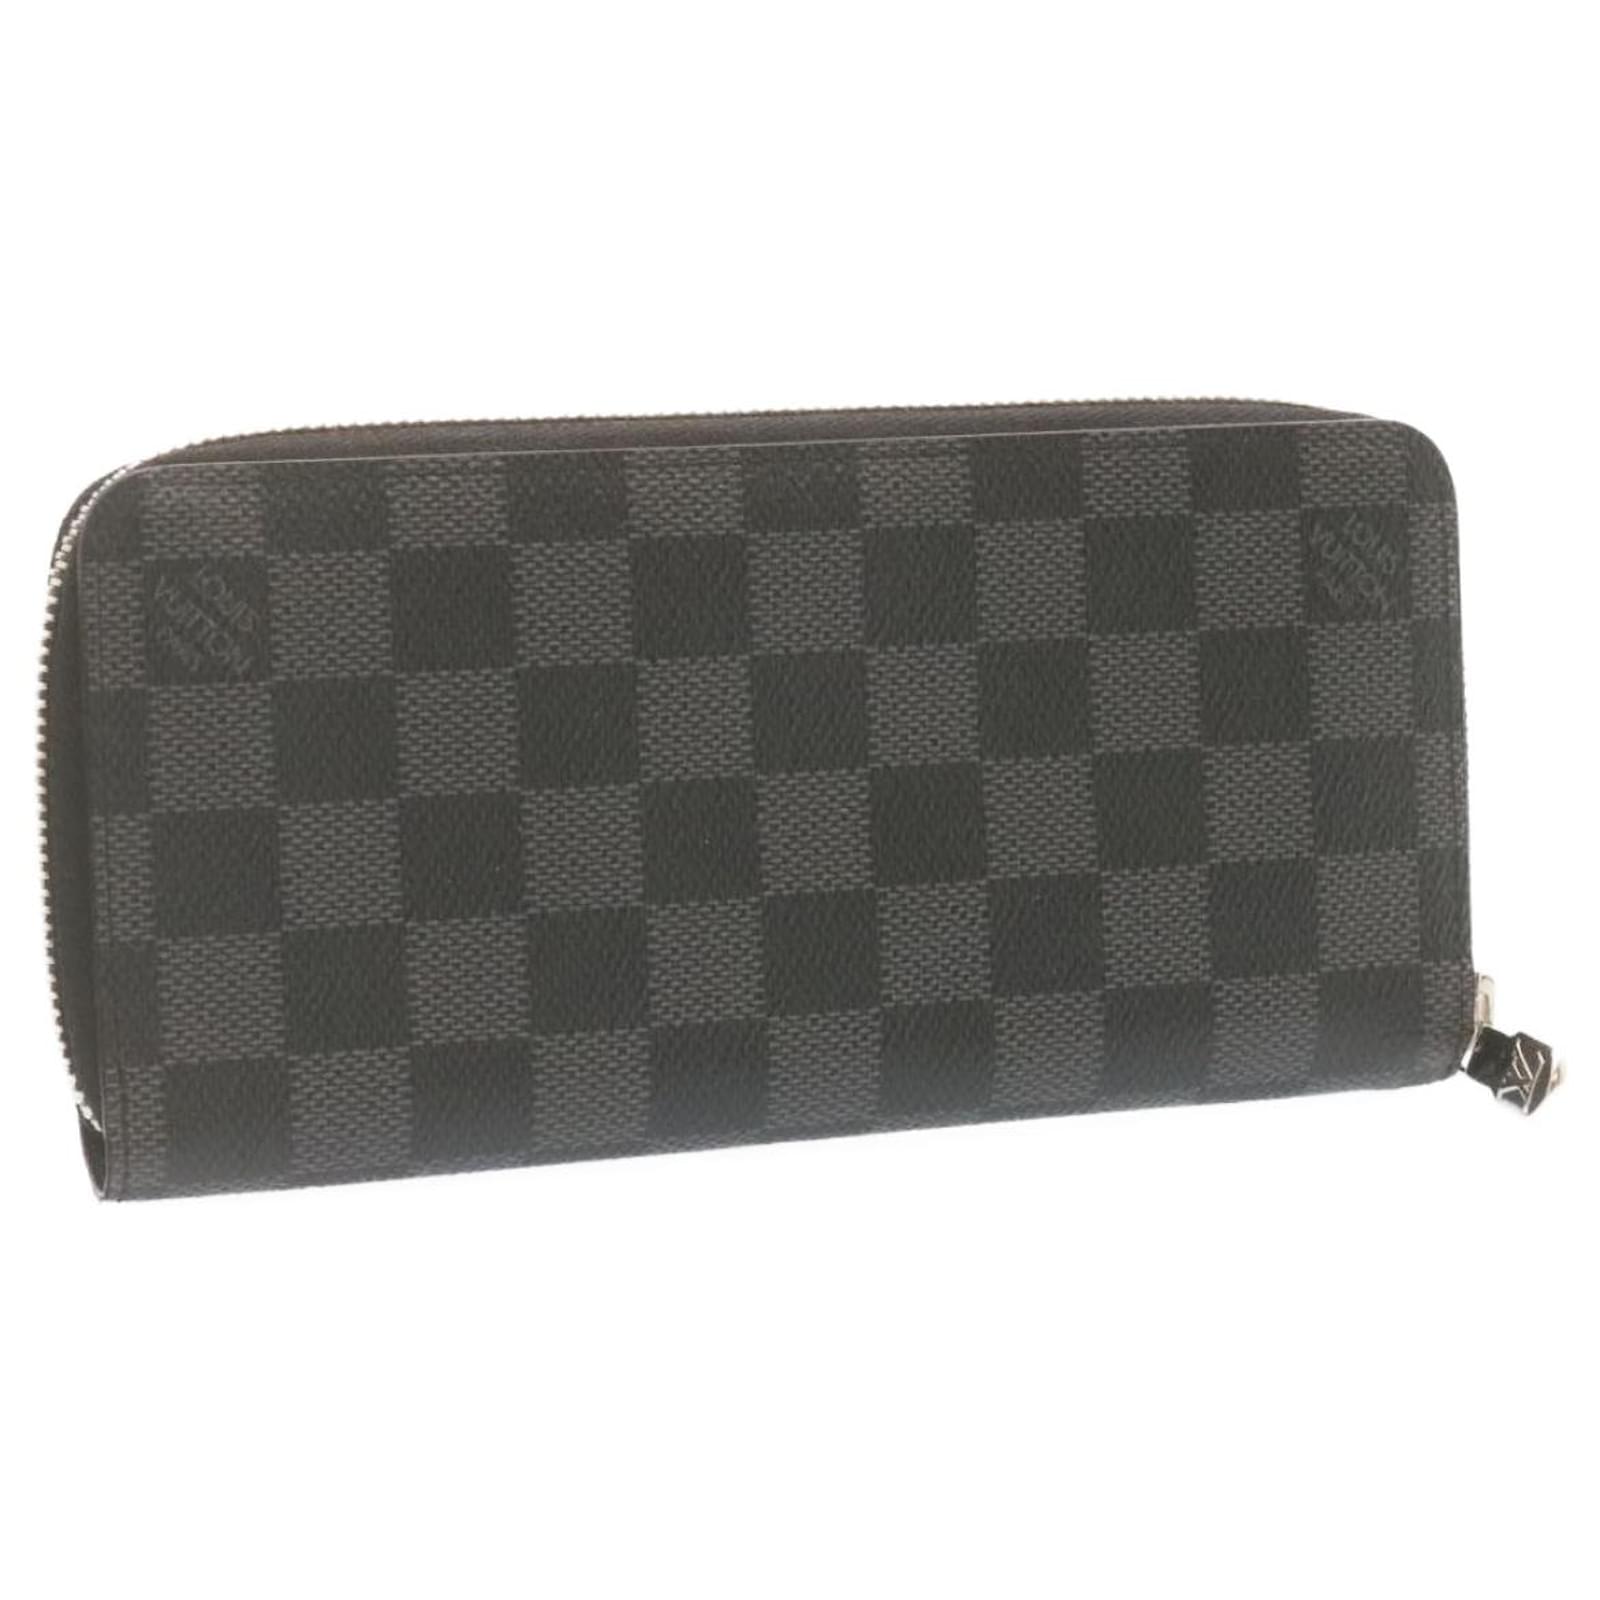 Zippy Dragonne Damier Graphite - Wallets and Small Leather Goods